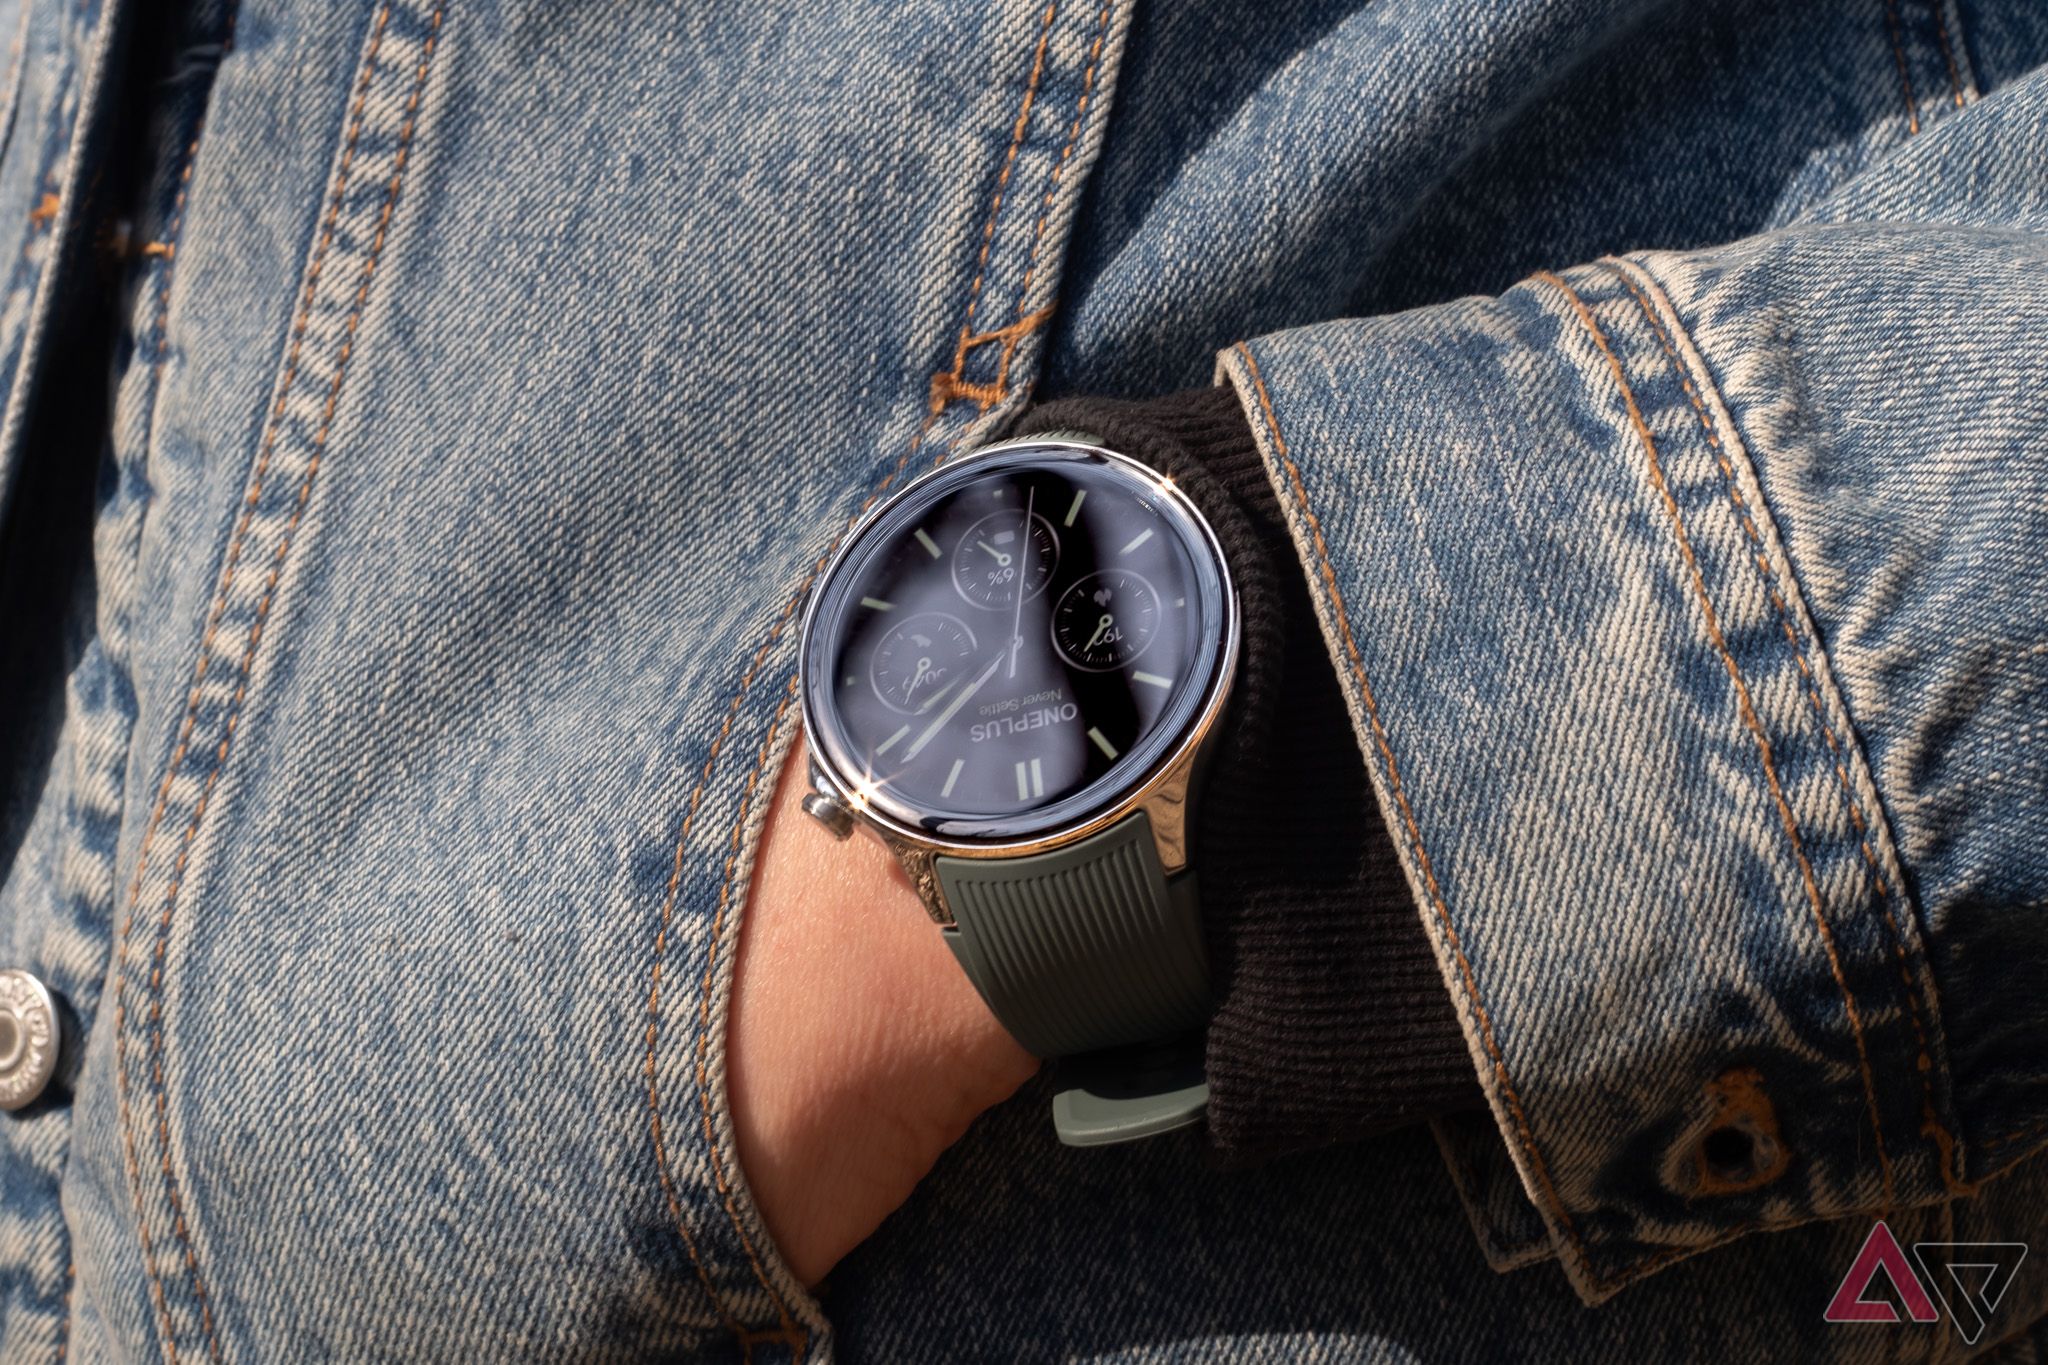 A smartwatch on an arm, with a hand in a pocket of a denim jacket